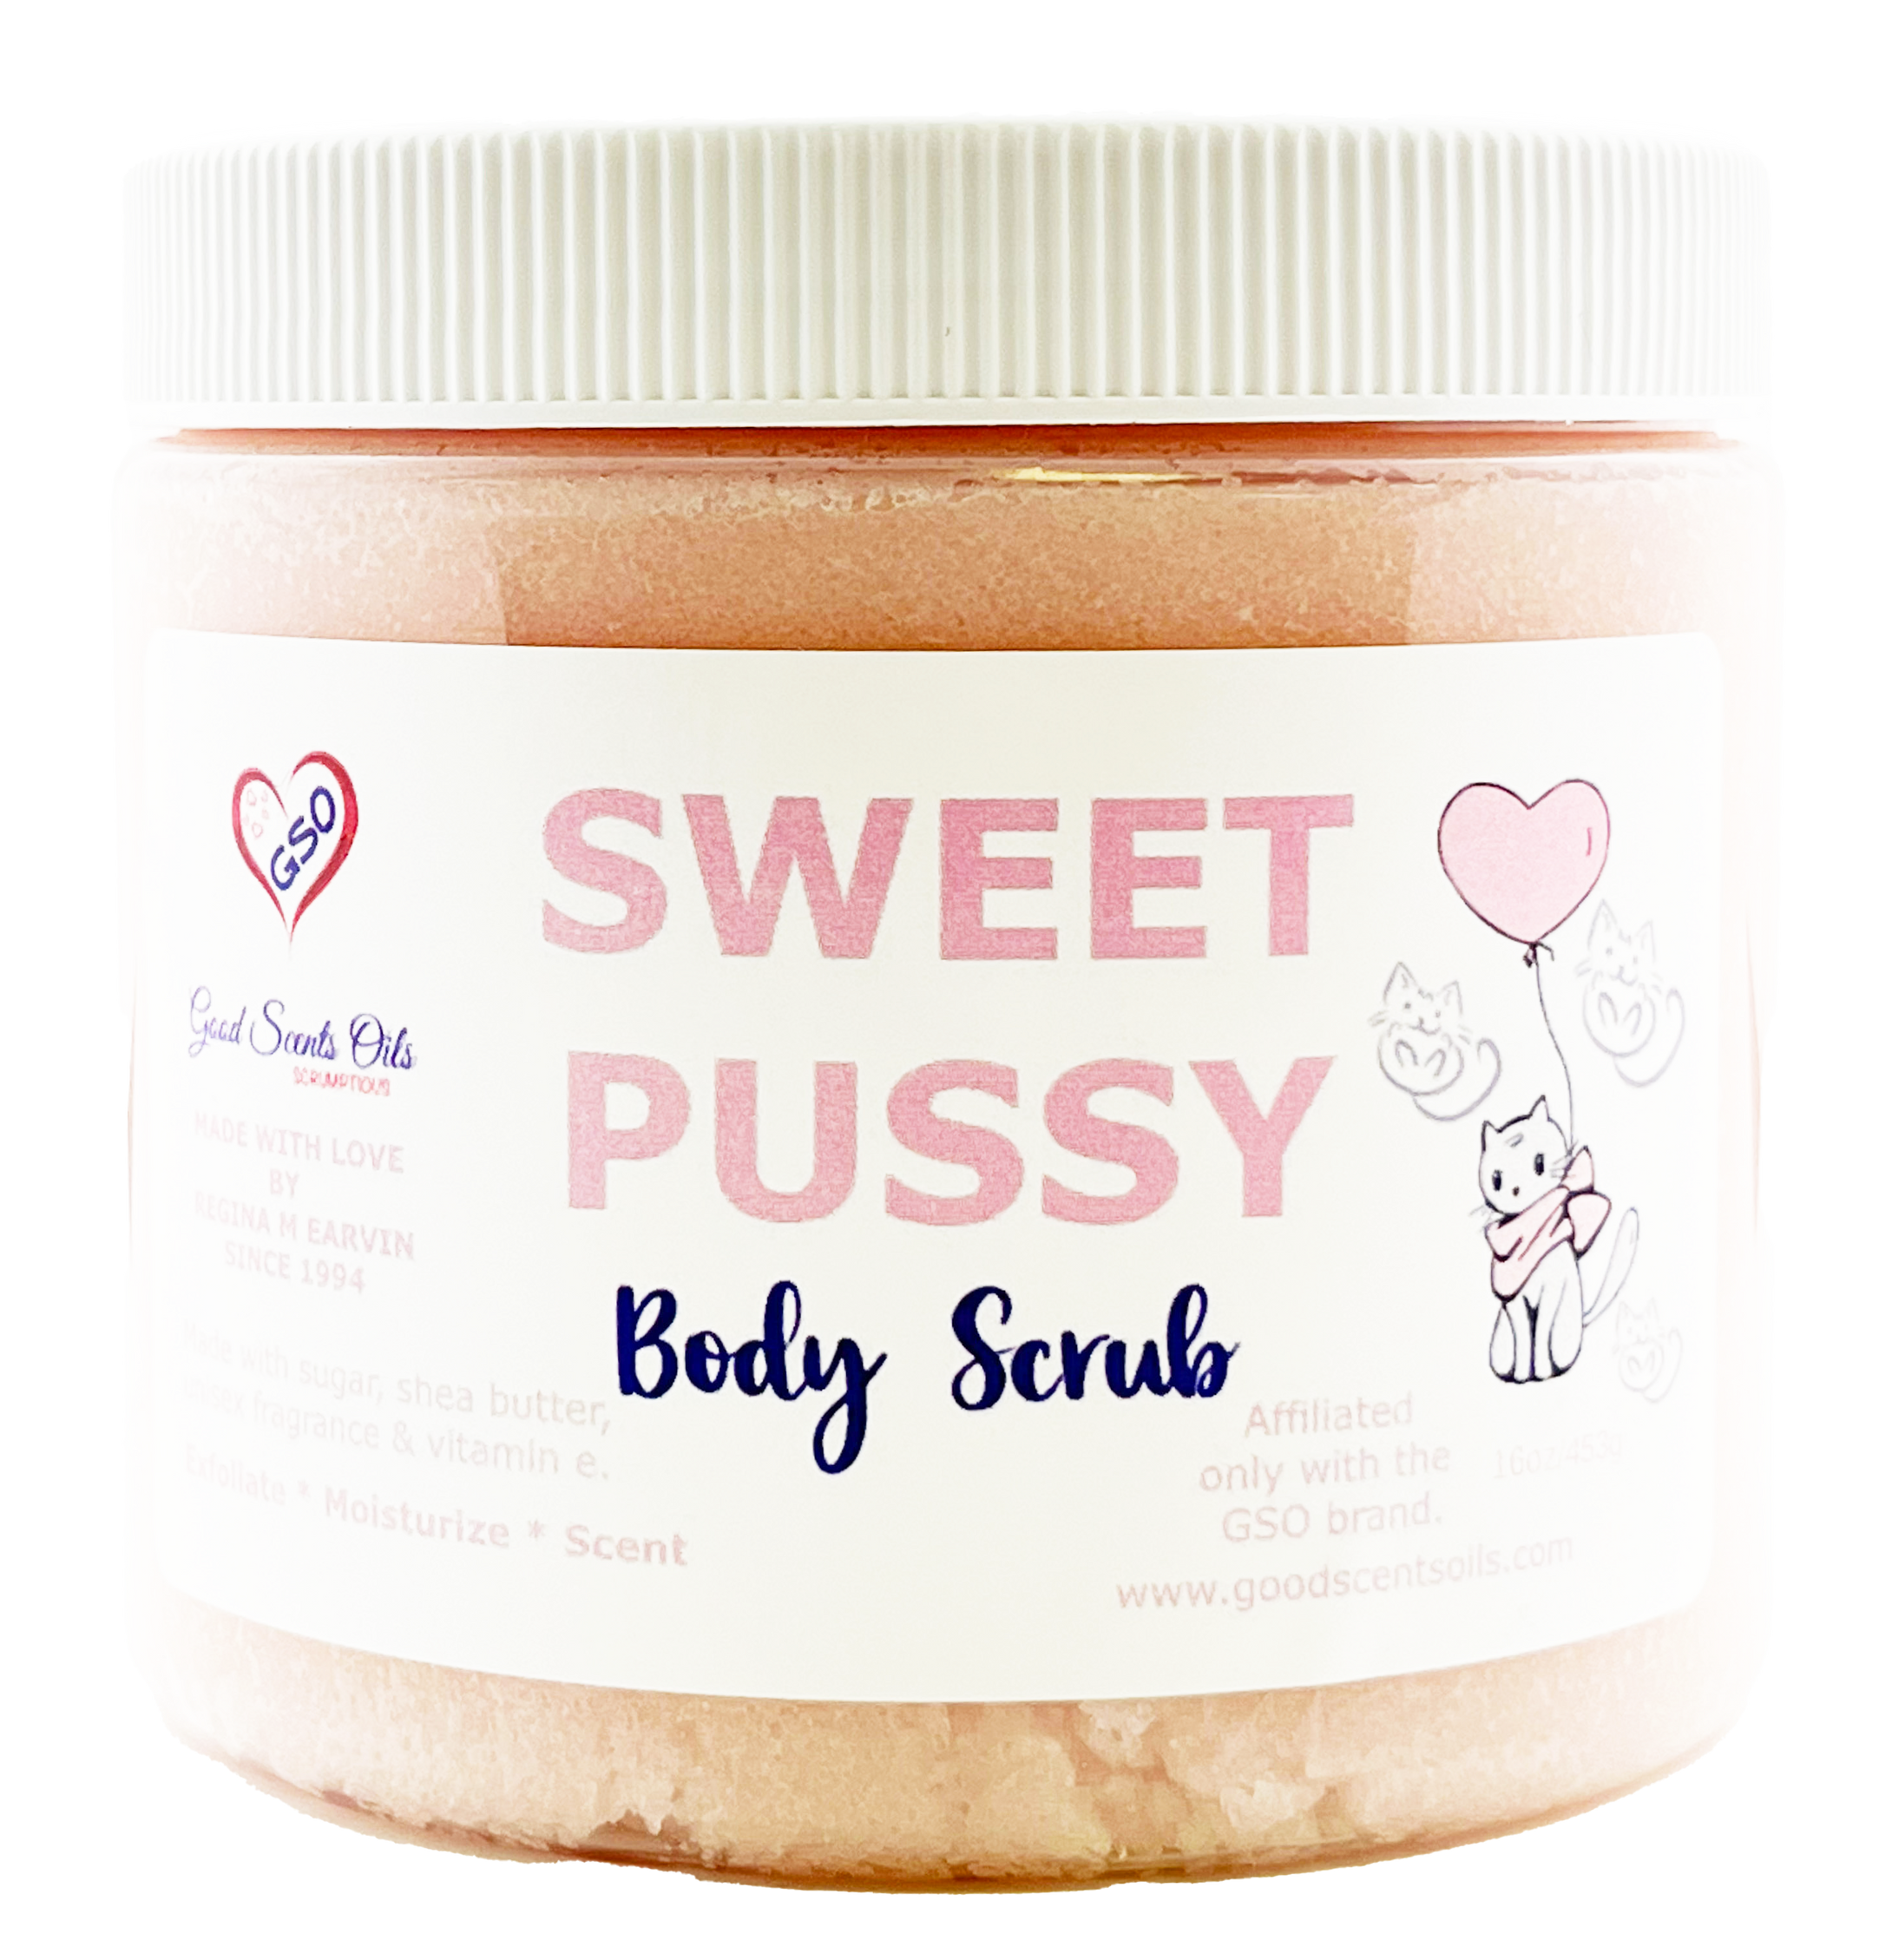 SWEET PUSSY BODY SCRUB 16oz ***Available In-Store Only***